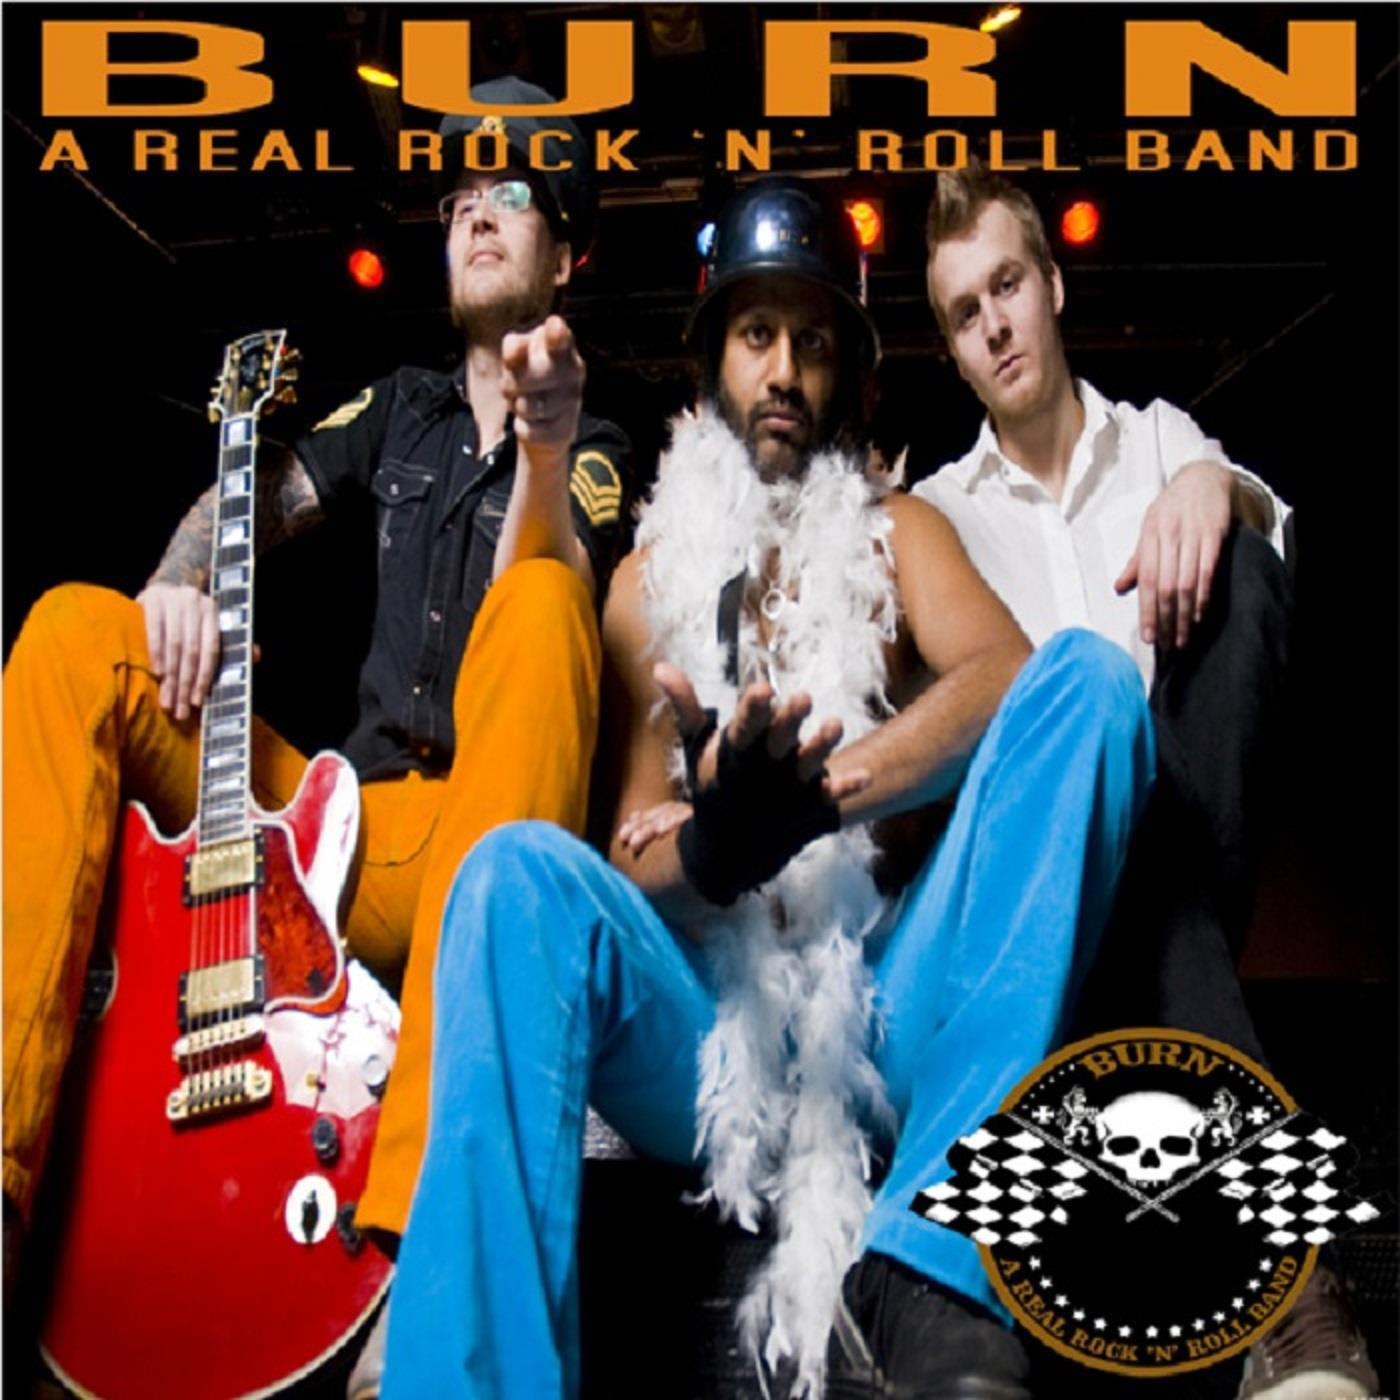 A real rock´n´roll band